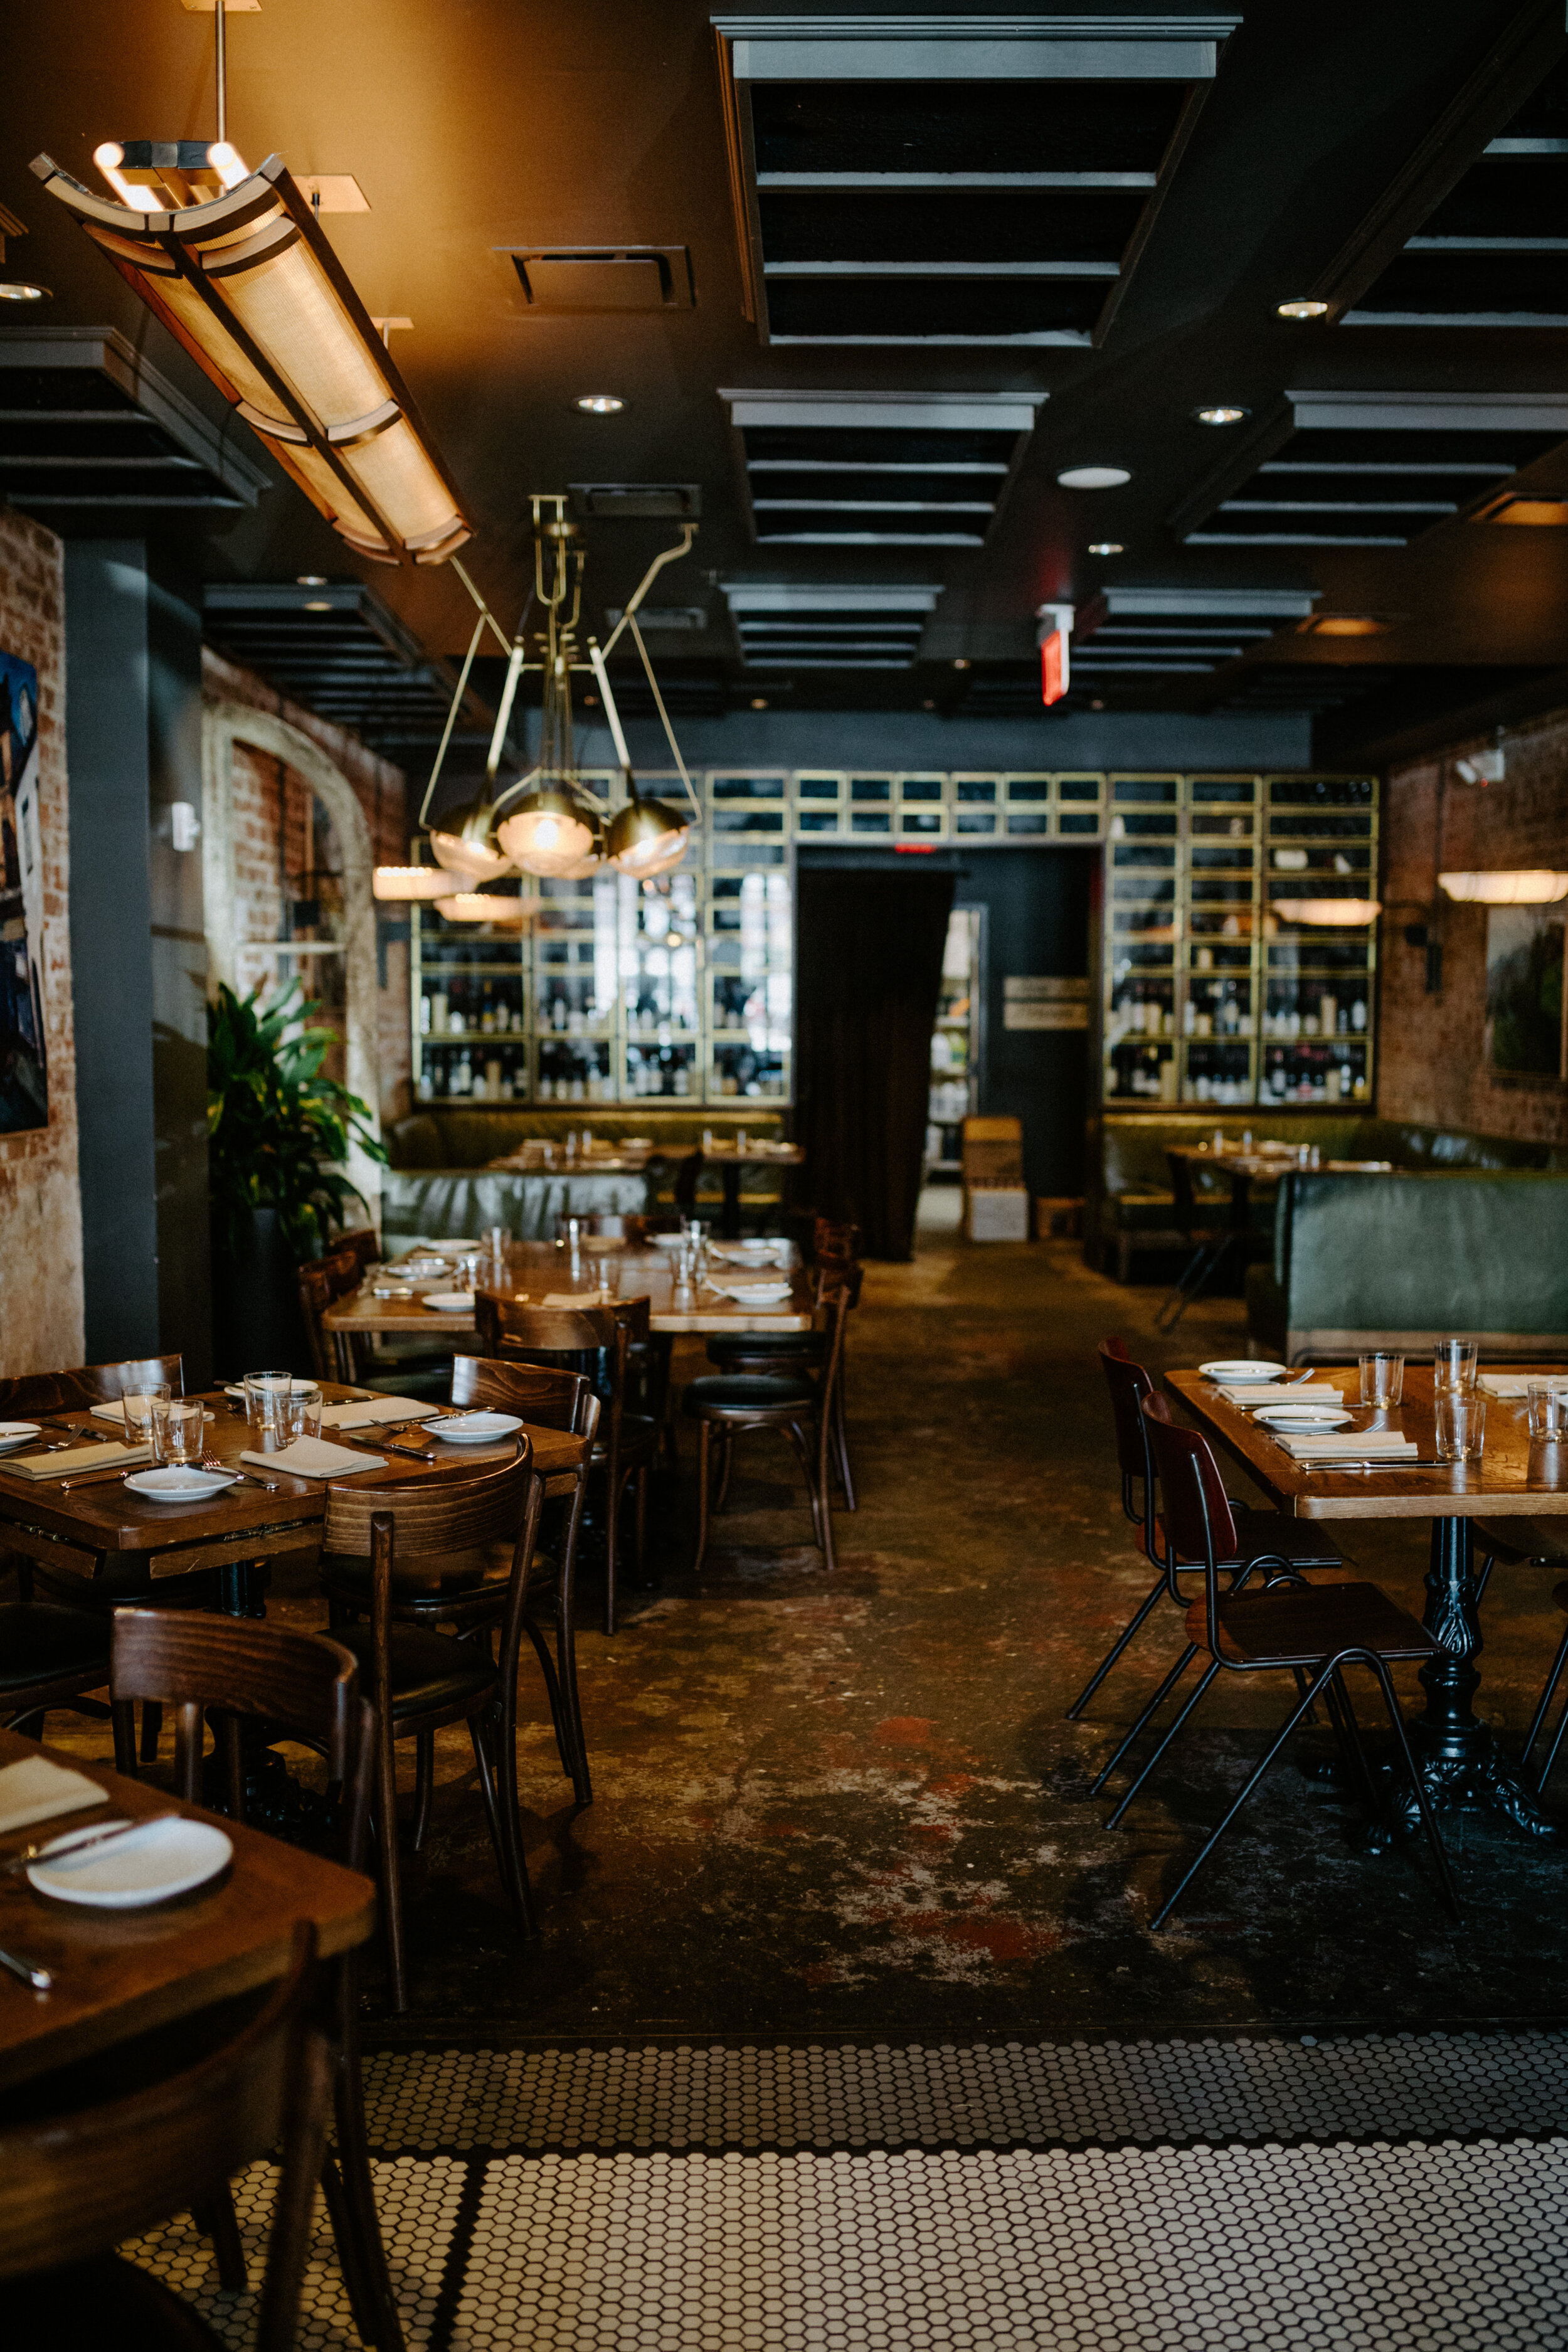 Compére Lapin Where to eat in New Orleans.JPG